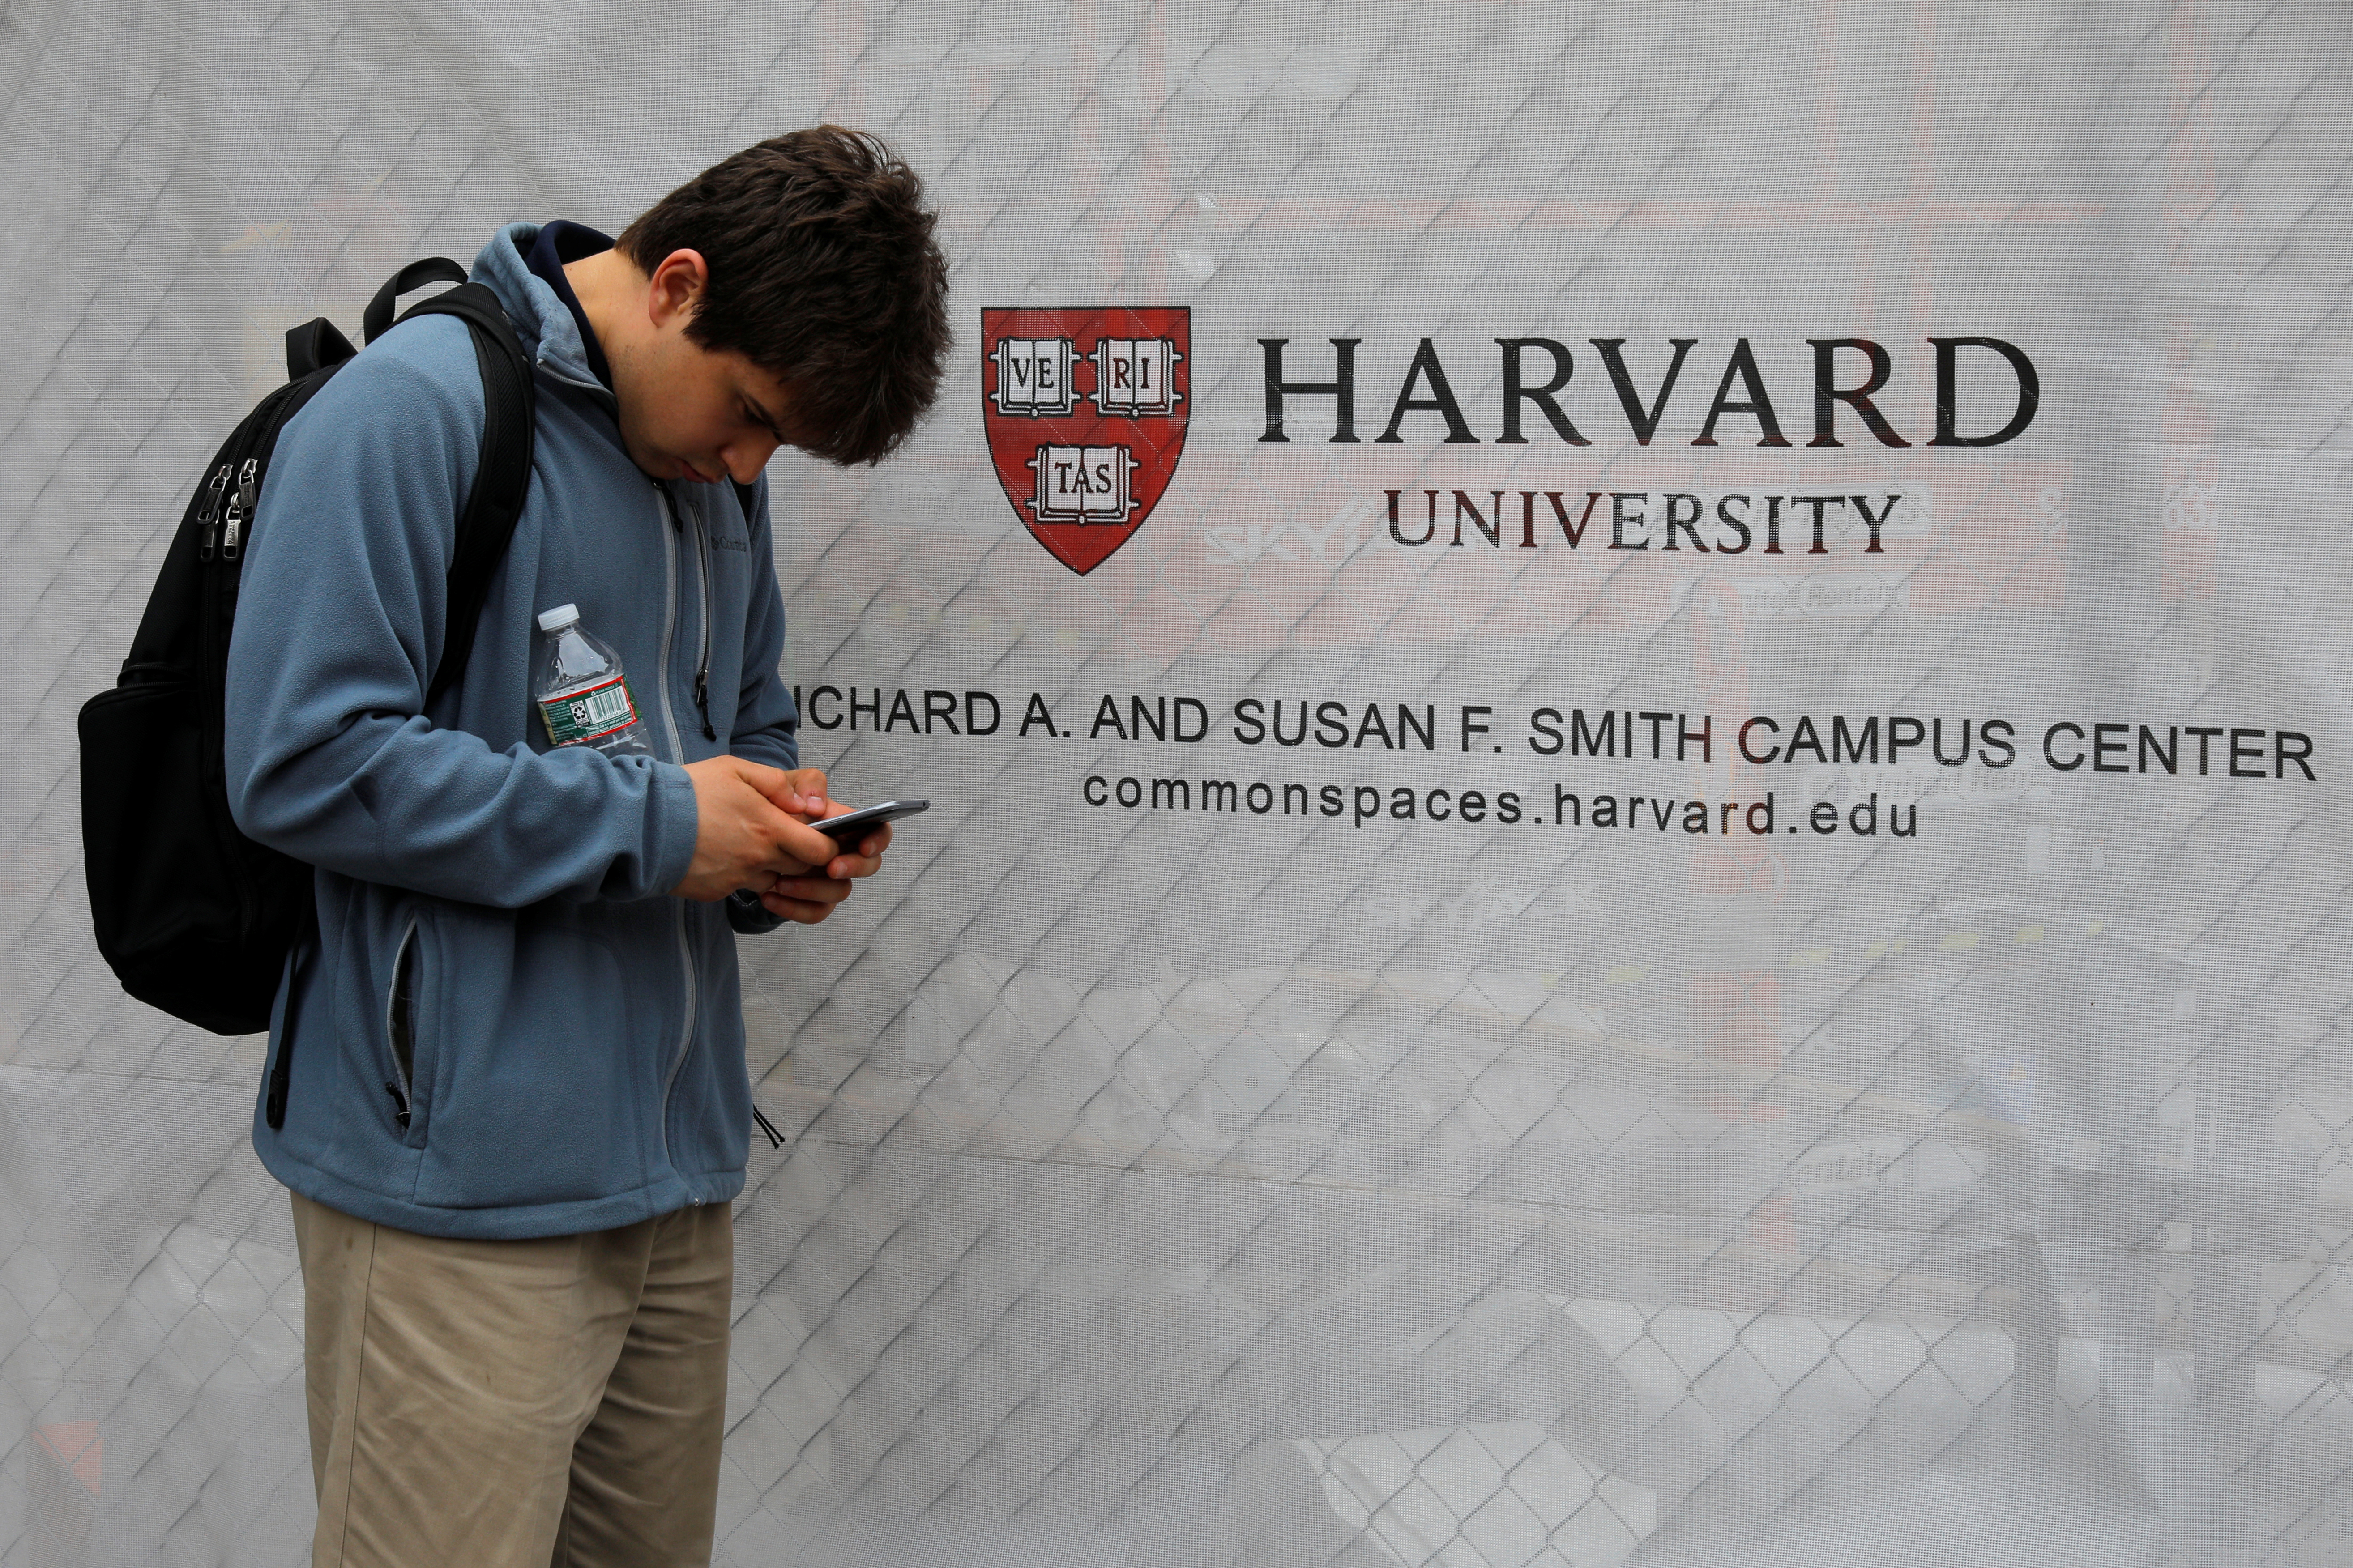 A man looks at his mobile phone beside a sign for Harvard University in Cambridge